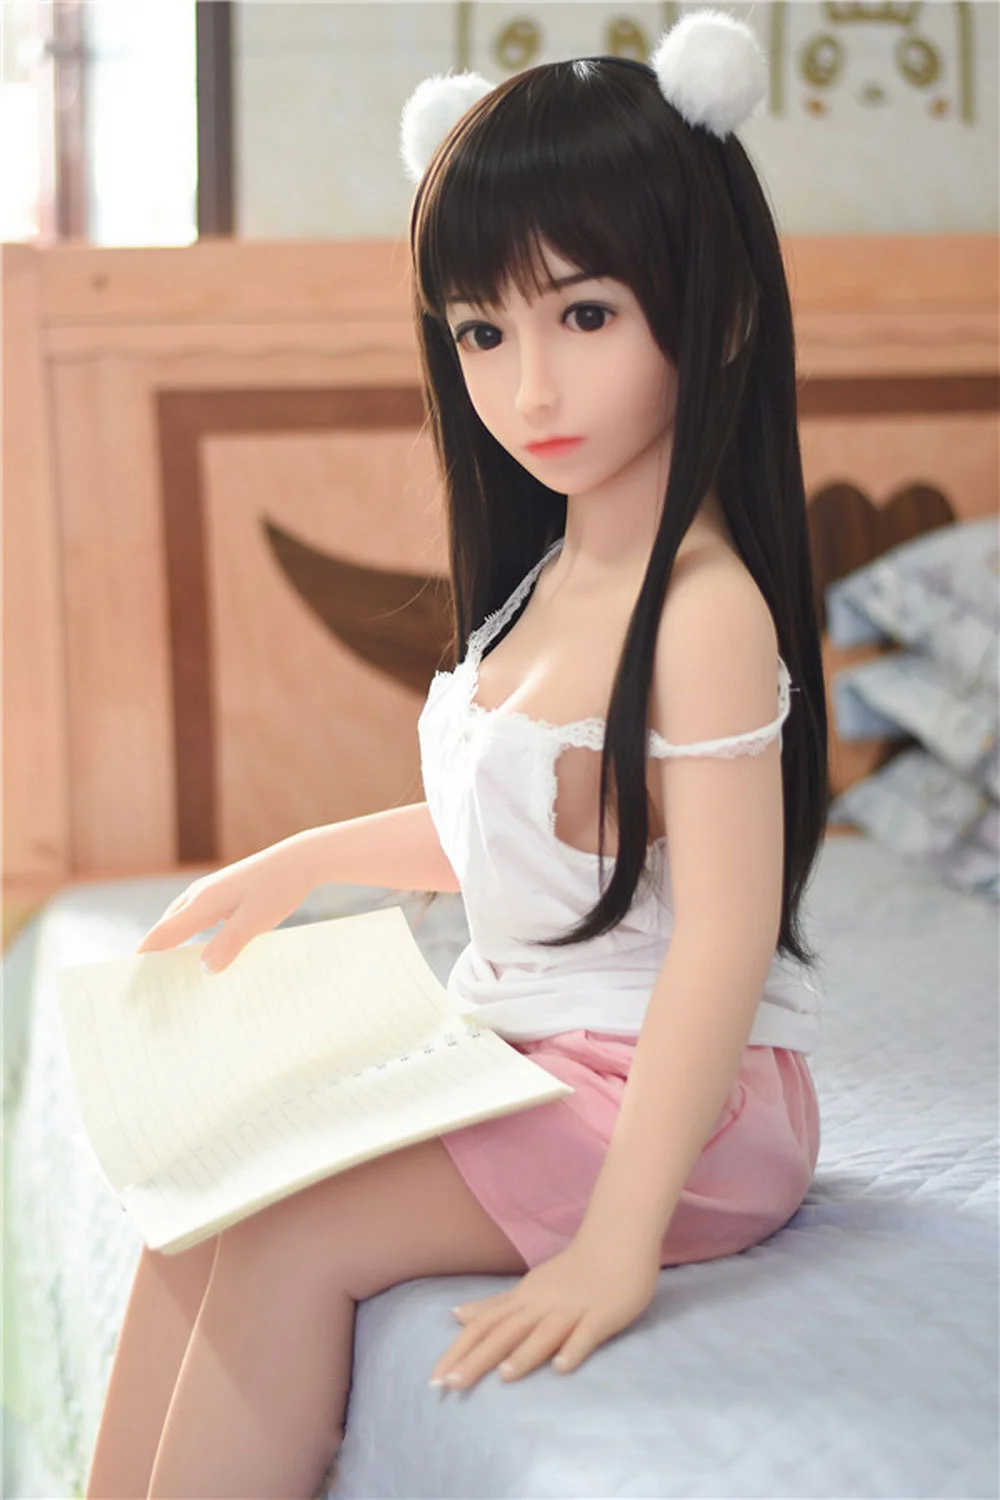 A sex doll wearing two white ball headbands